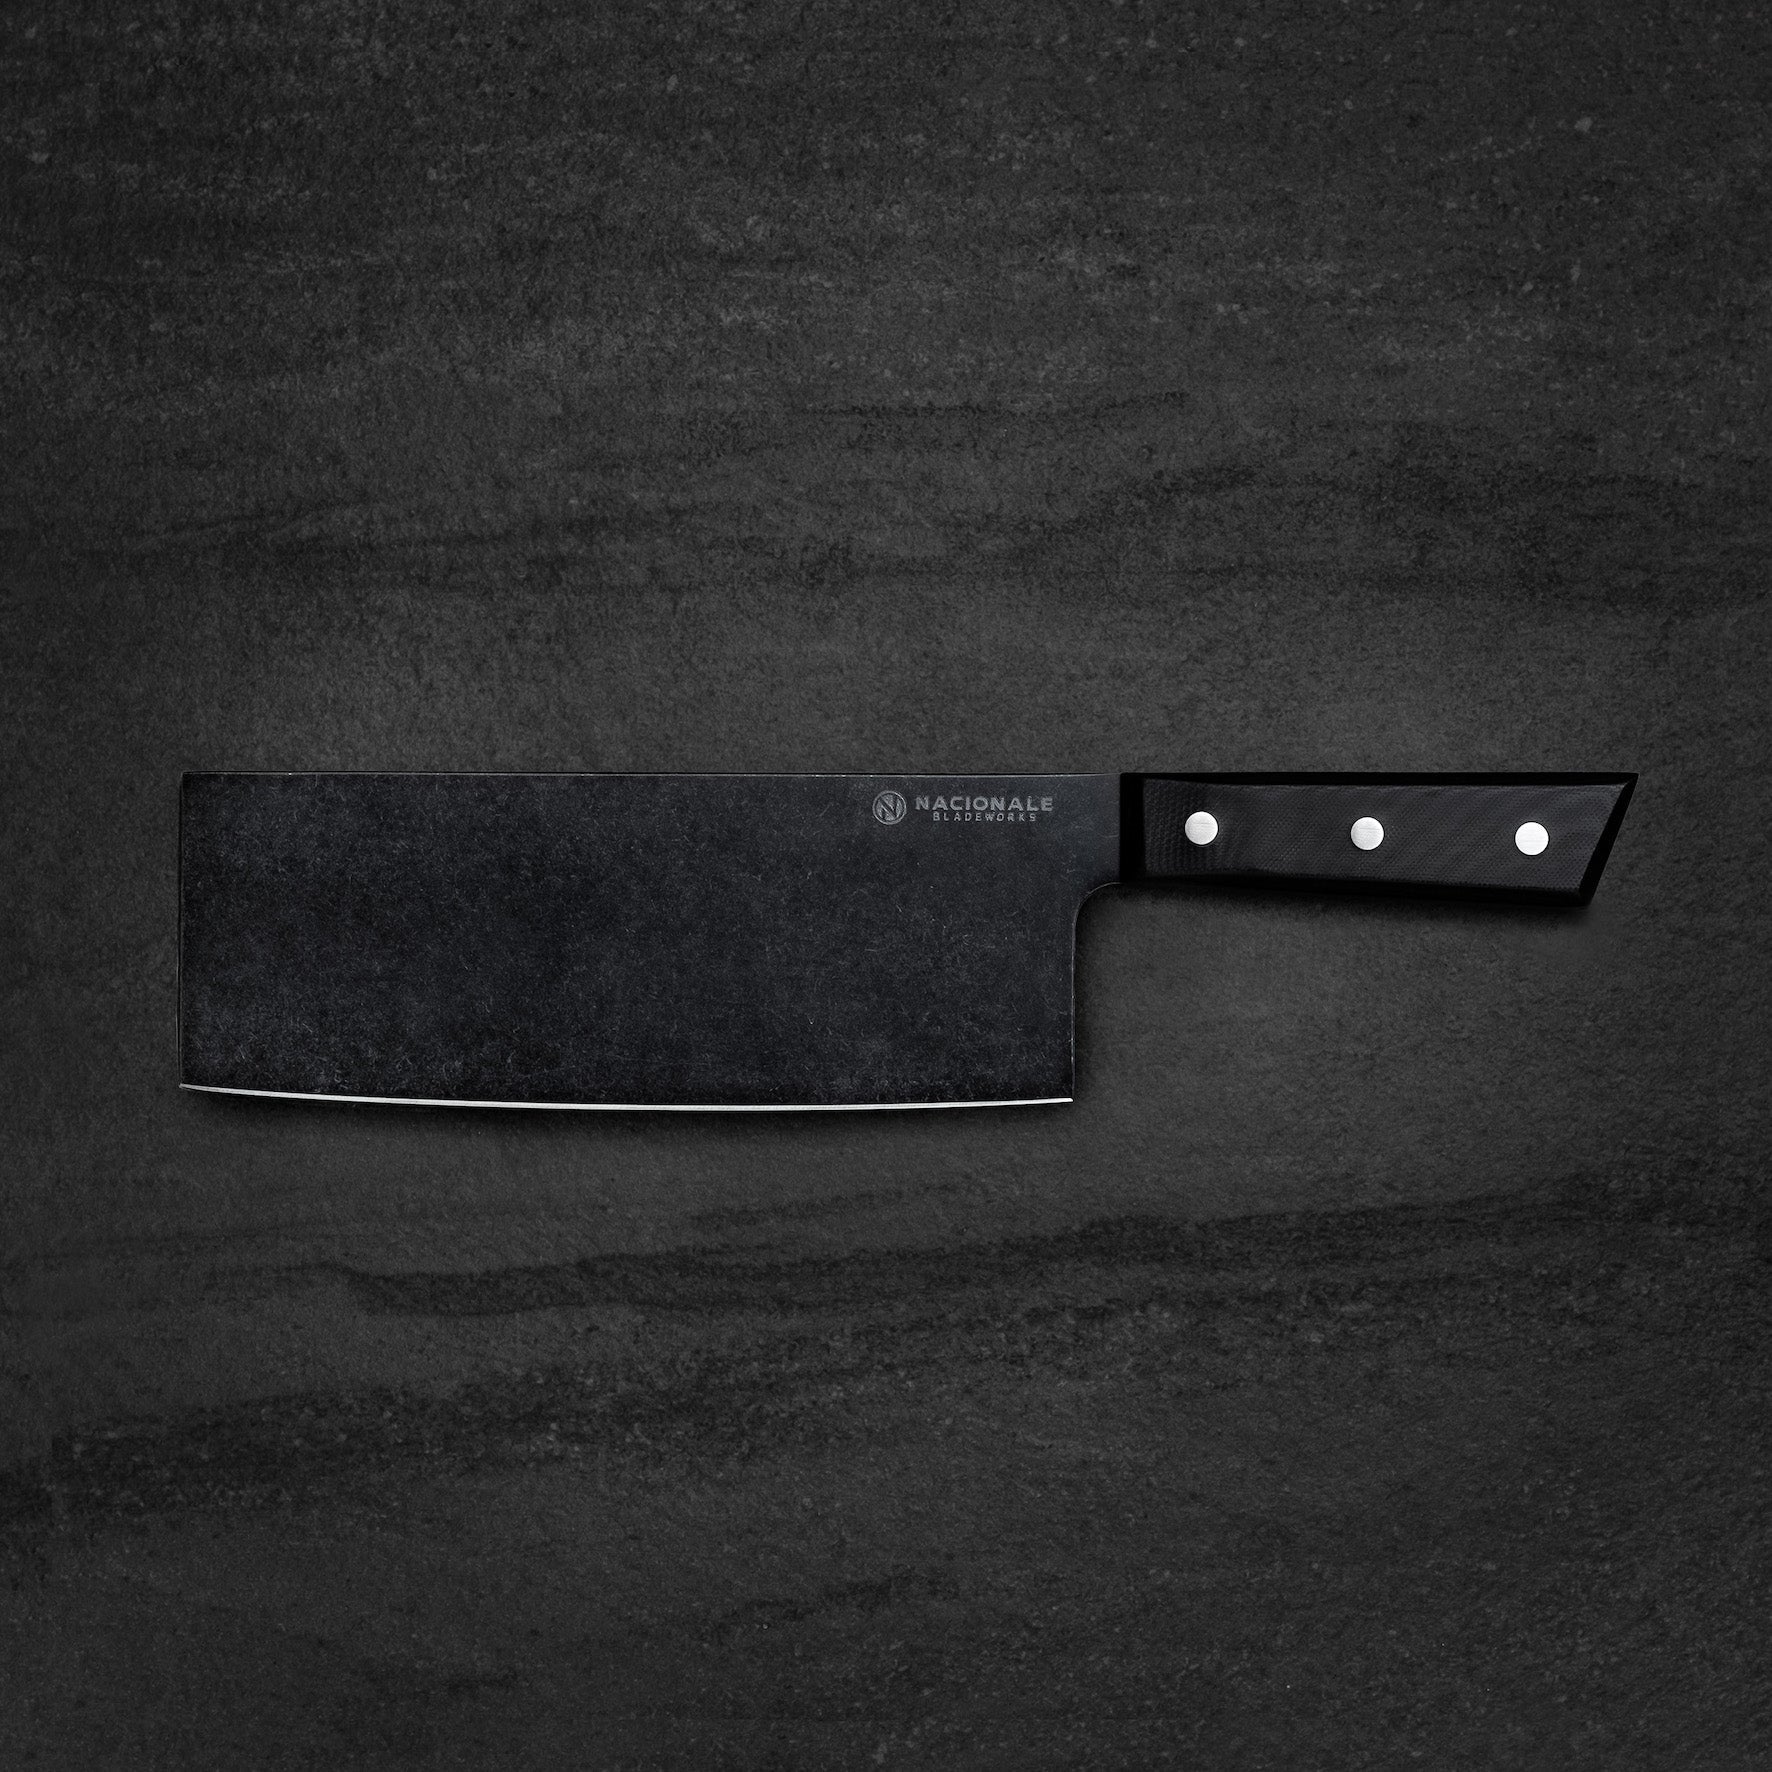 200mm Chinese Cleaver. Full Tang. G10 Composite Scales - Nacionale Bladeworks